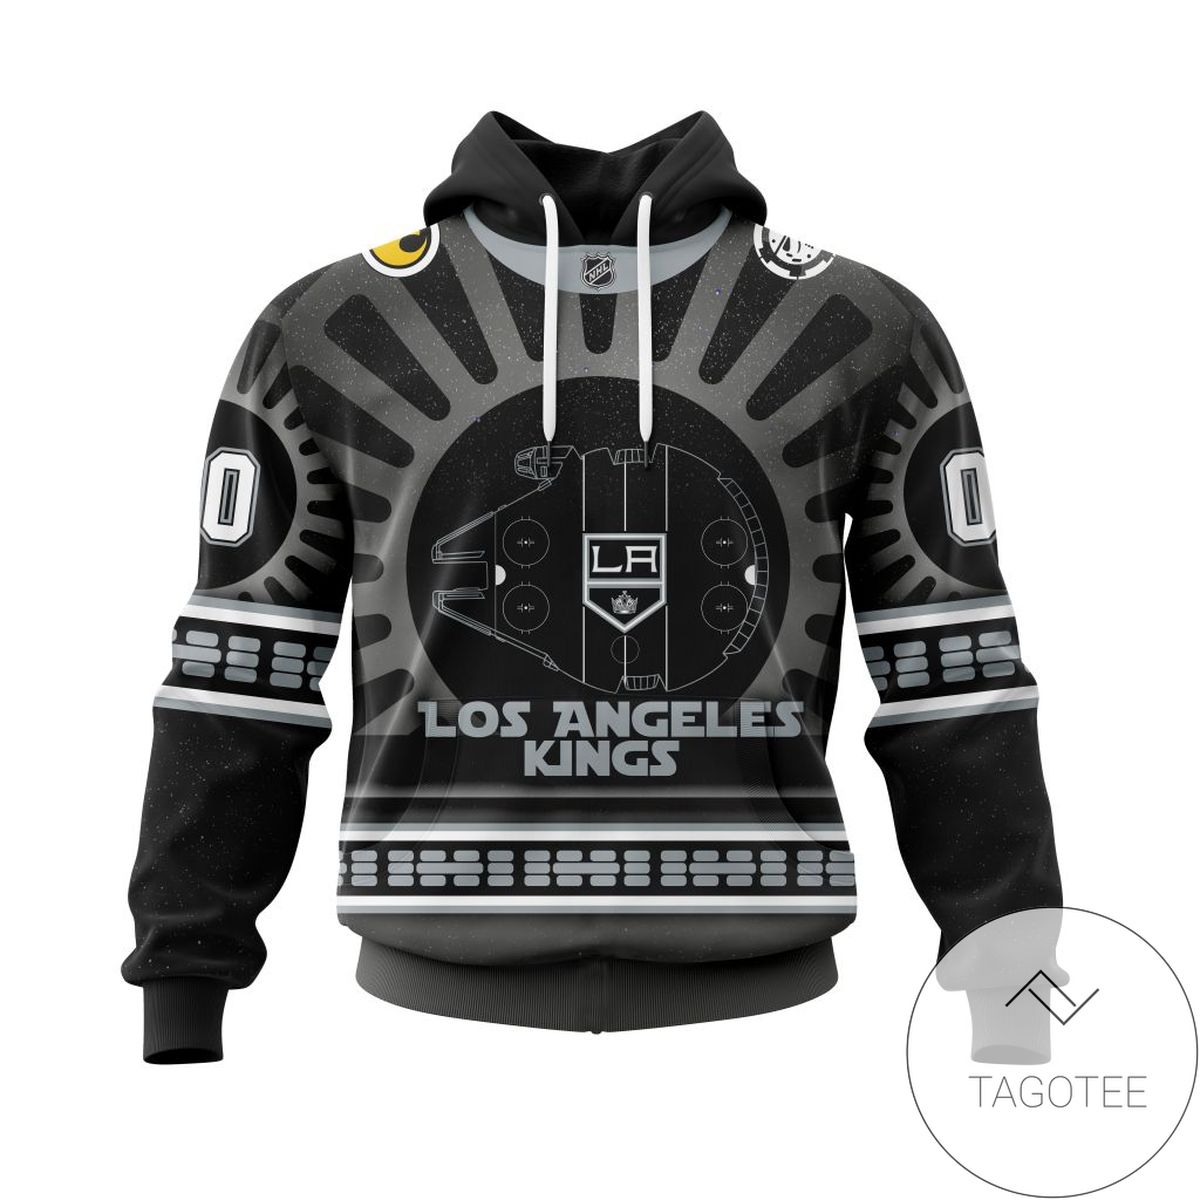 NHL Los Angeles Kings Star Wars May The 4th Be With You Black Version Personalized Jersey Hoodie T-shirt Jacket